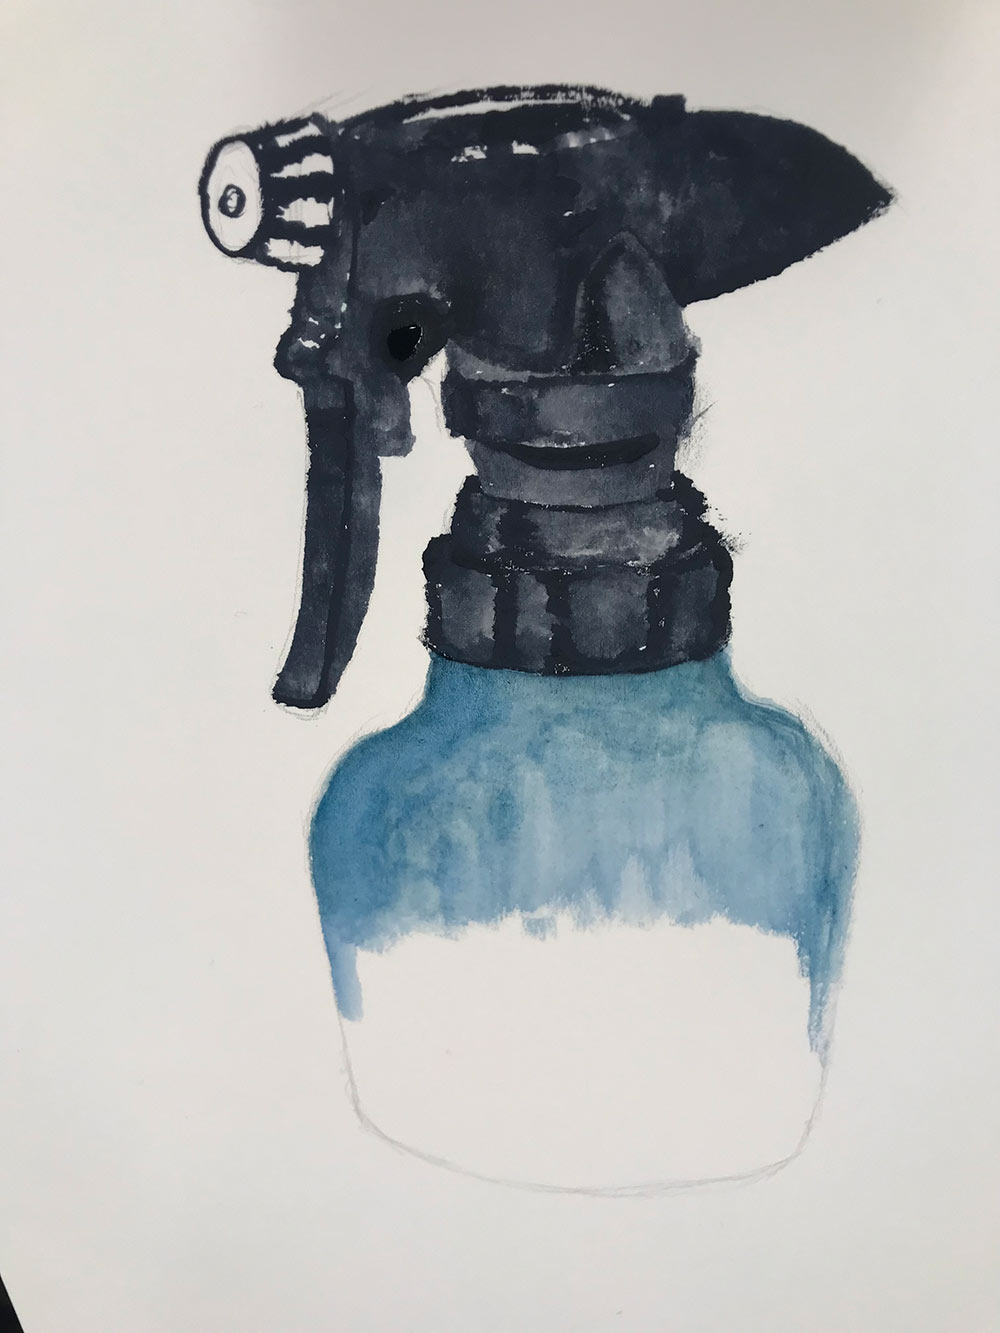 closeup of spray bottle - painted in water color - bottom is unfinished